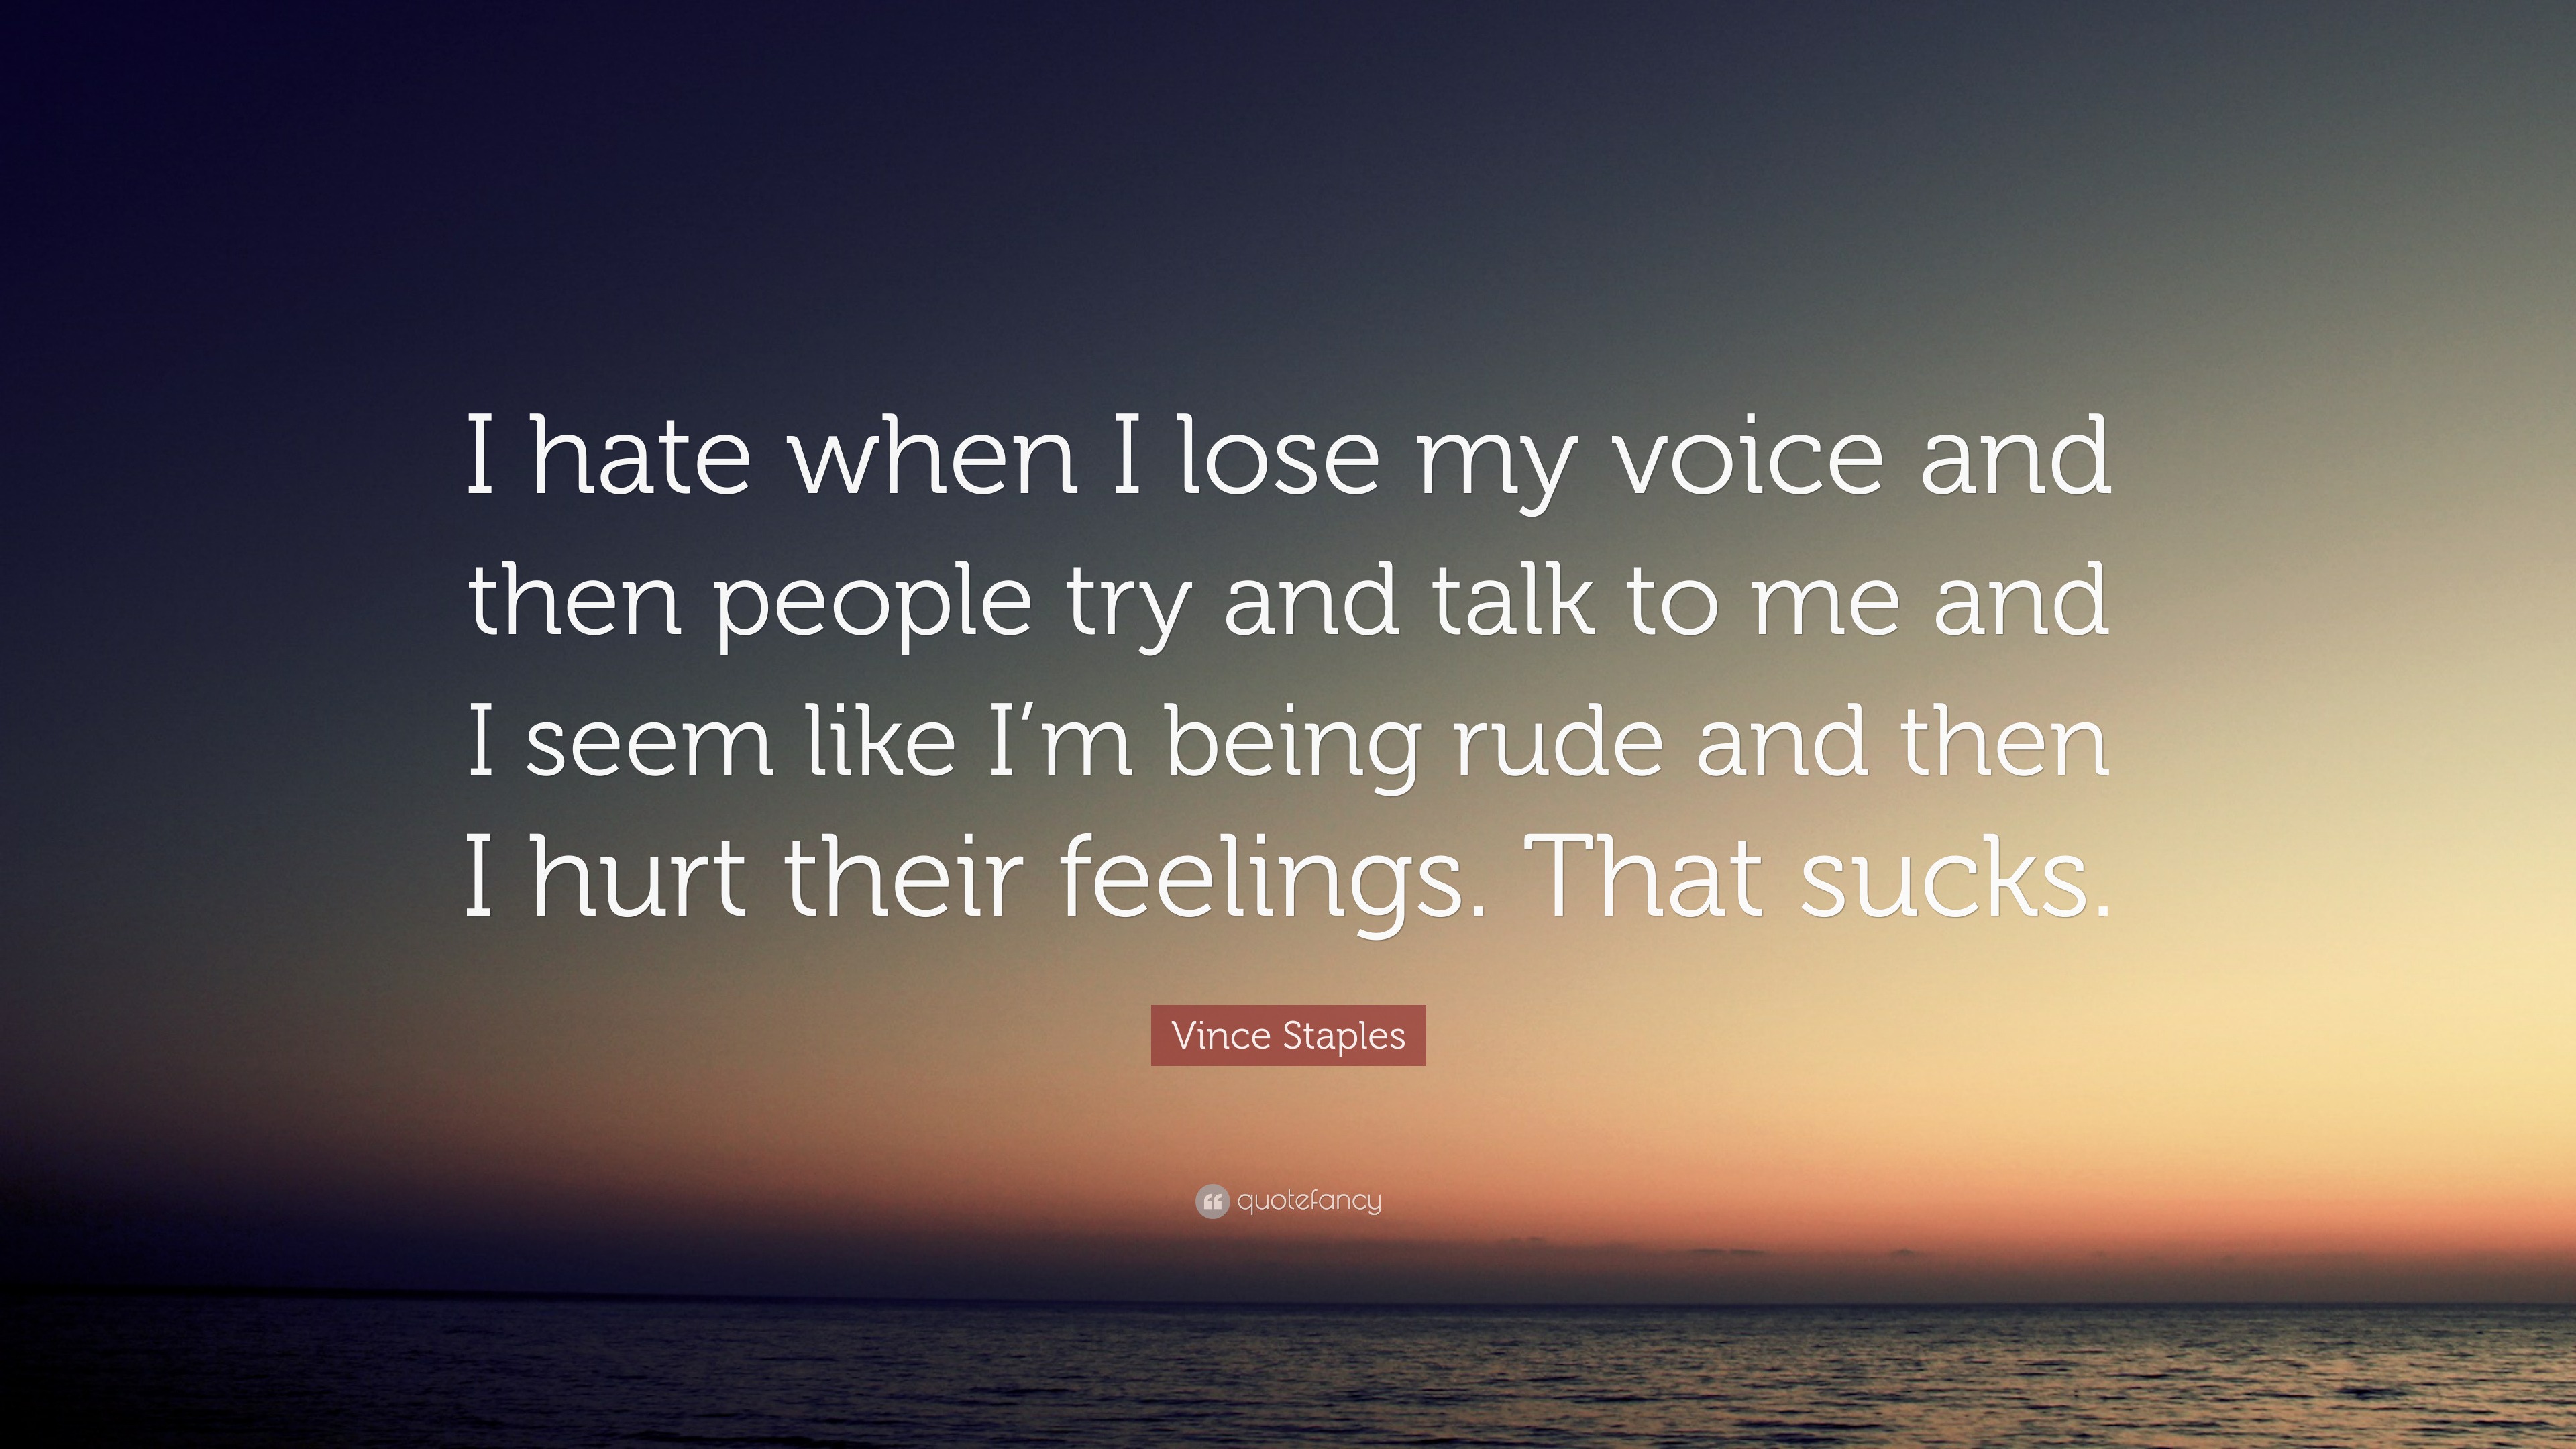 Vince Staples Quote: “I hate when I lose my voice and then ...